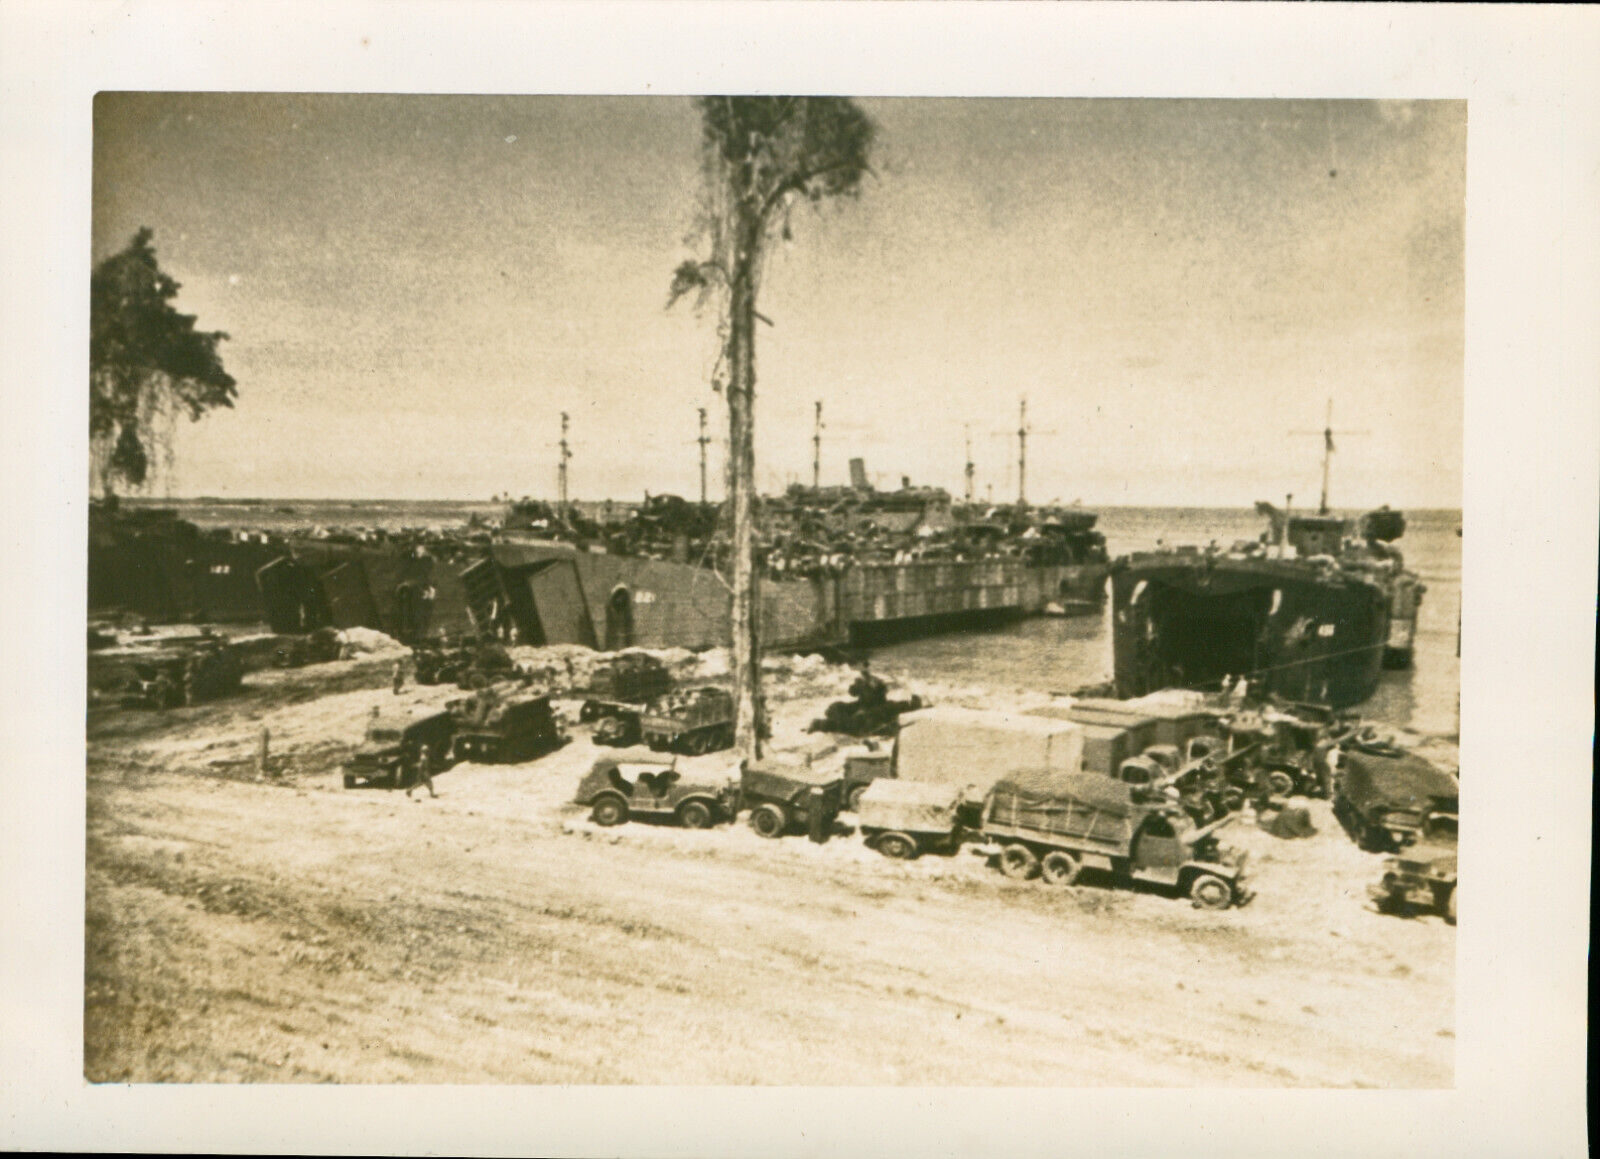 1945 WWII GI's Philippines  4x5 Photo LCT's at beach, trucks, jeeps, etc